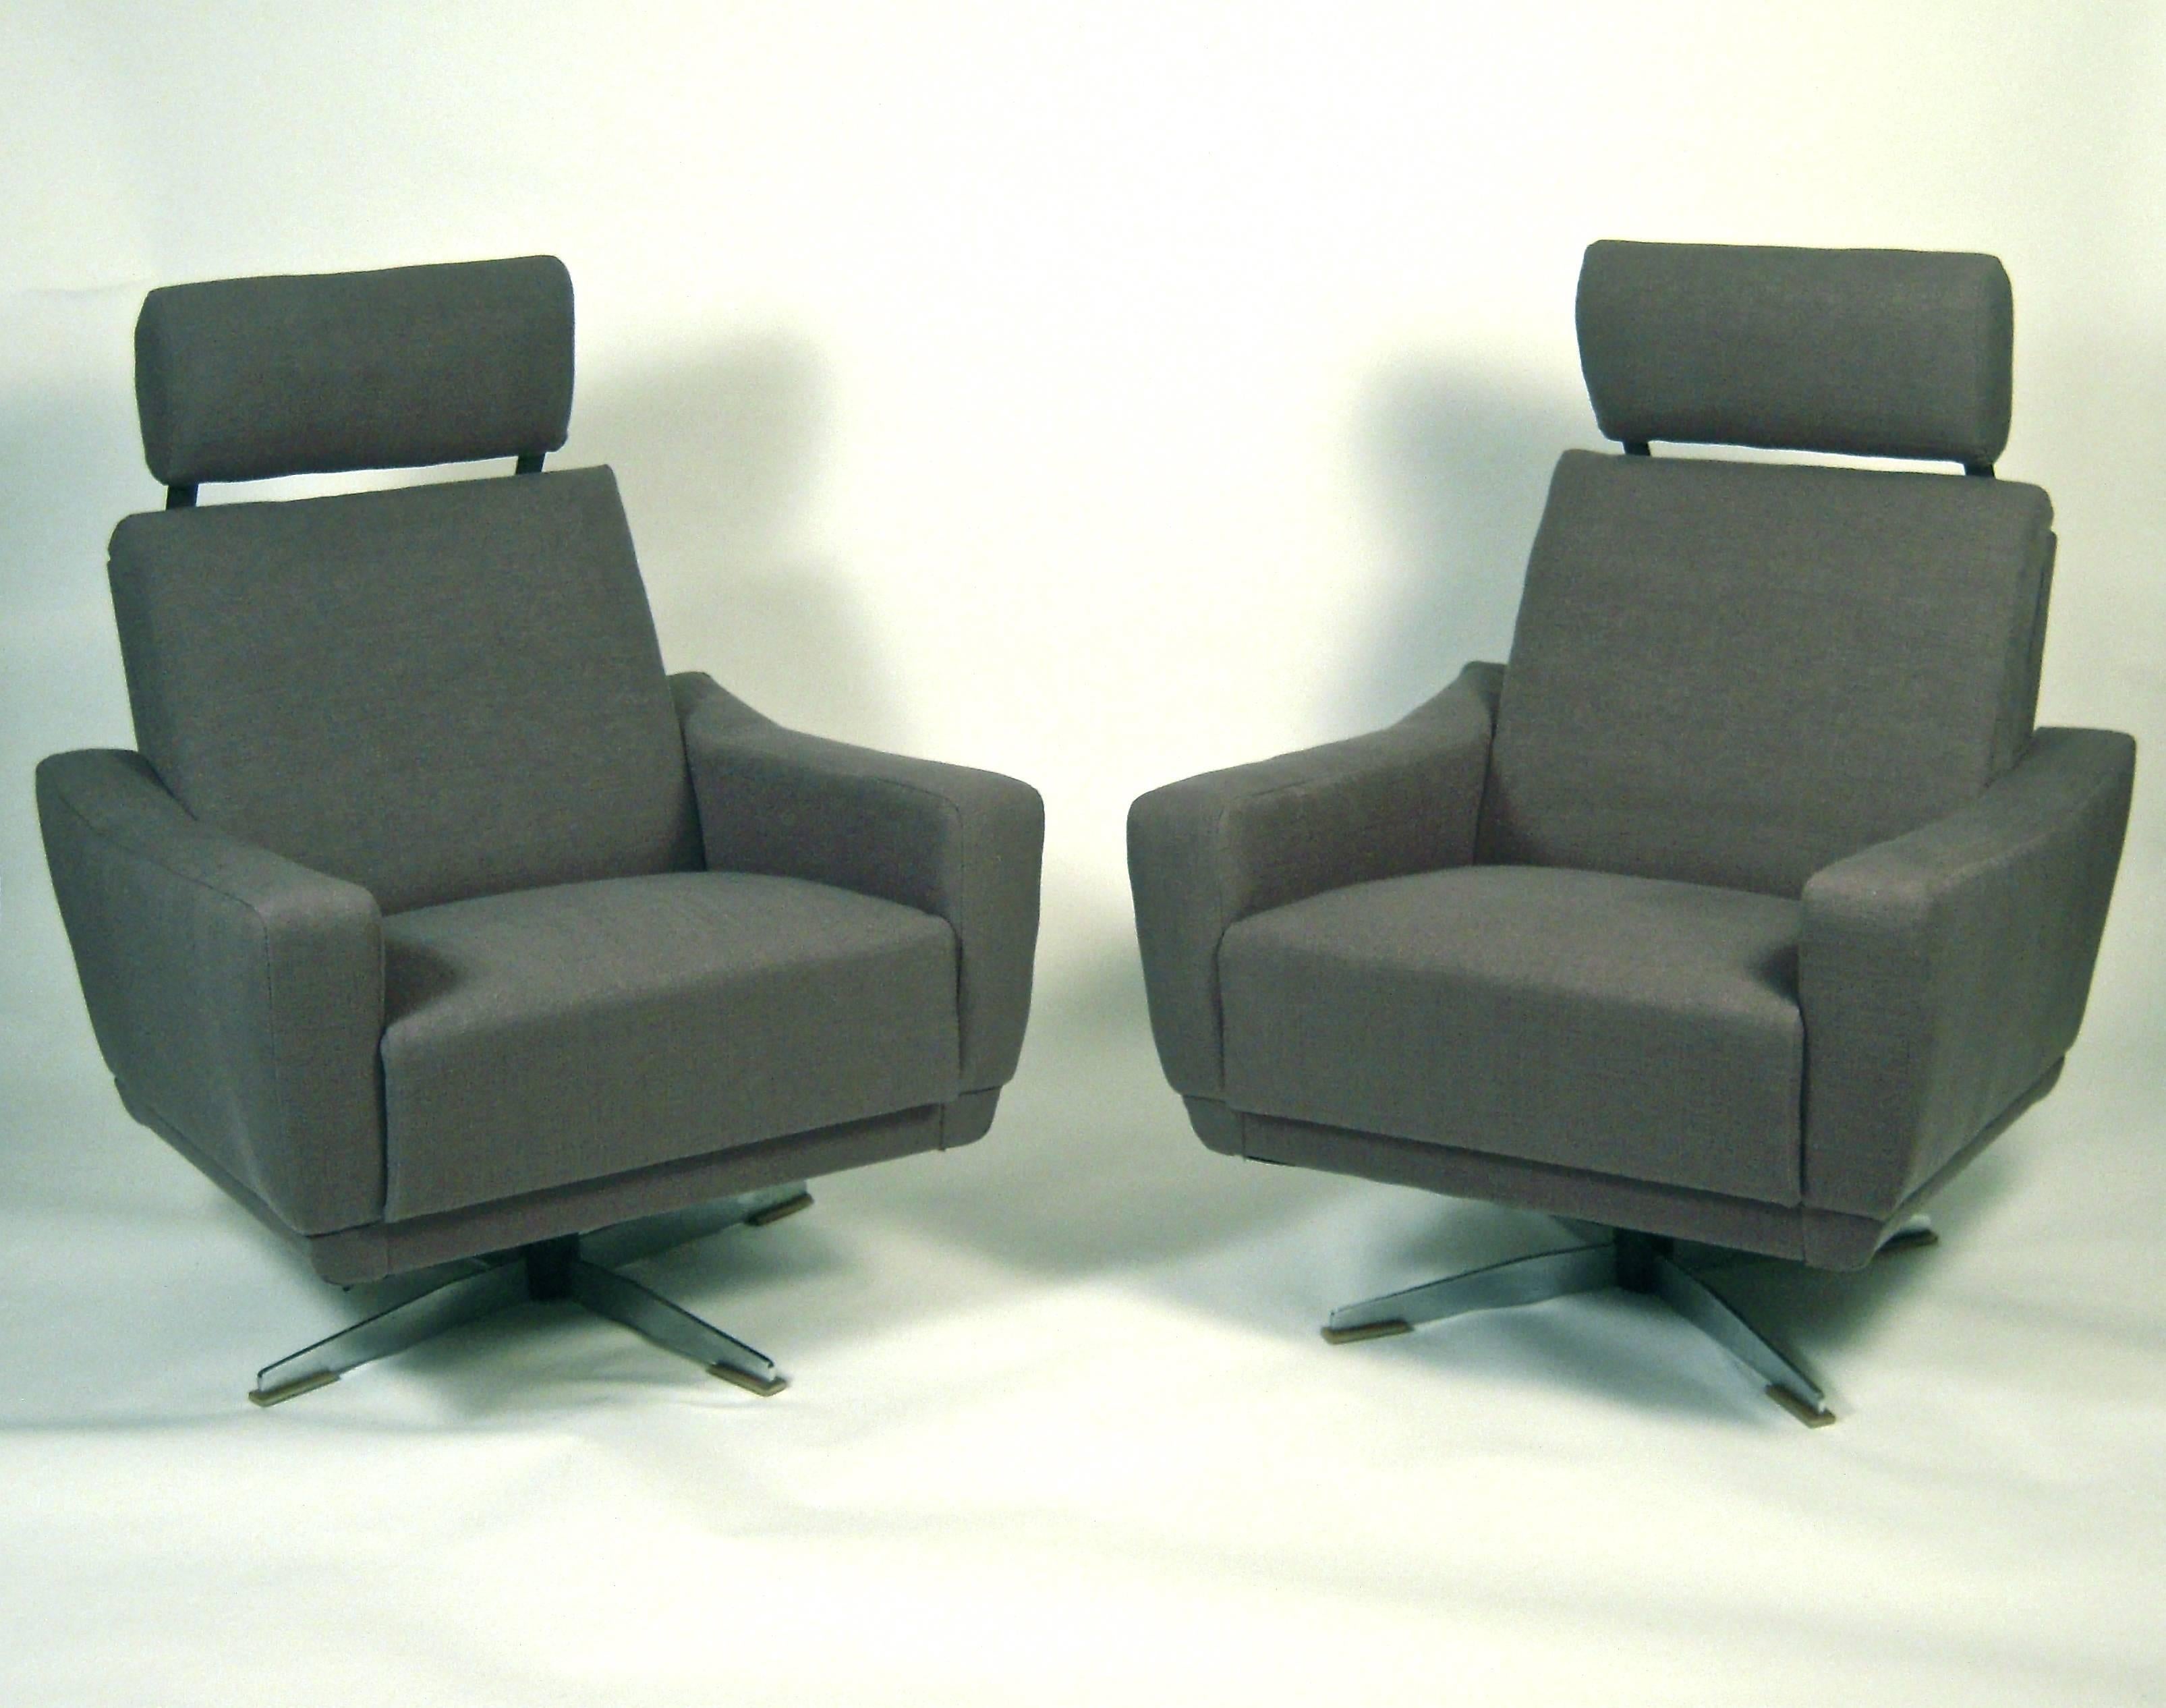 A pair of unusual, versatile and very comfortable German Mid-Century Modern swivel armchairs, with retractable headrests, which flip up from behind the back cushions, and reclining backs, newly upholstered in charcoal grey linen, on steel X-form